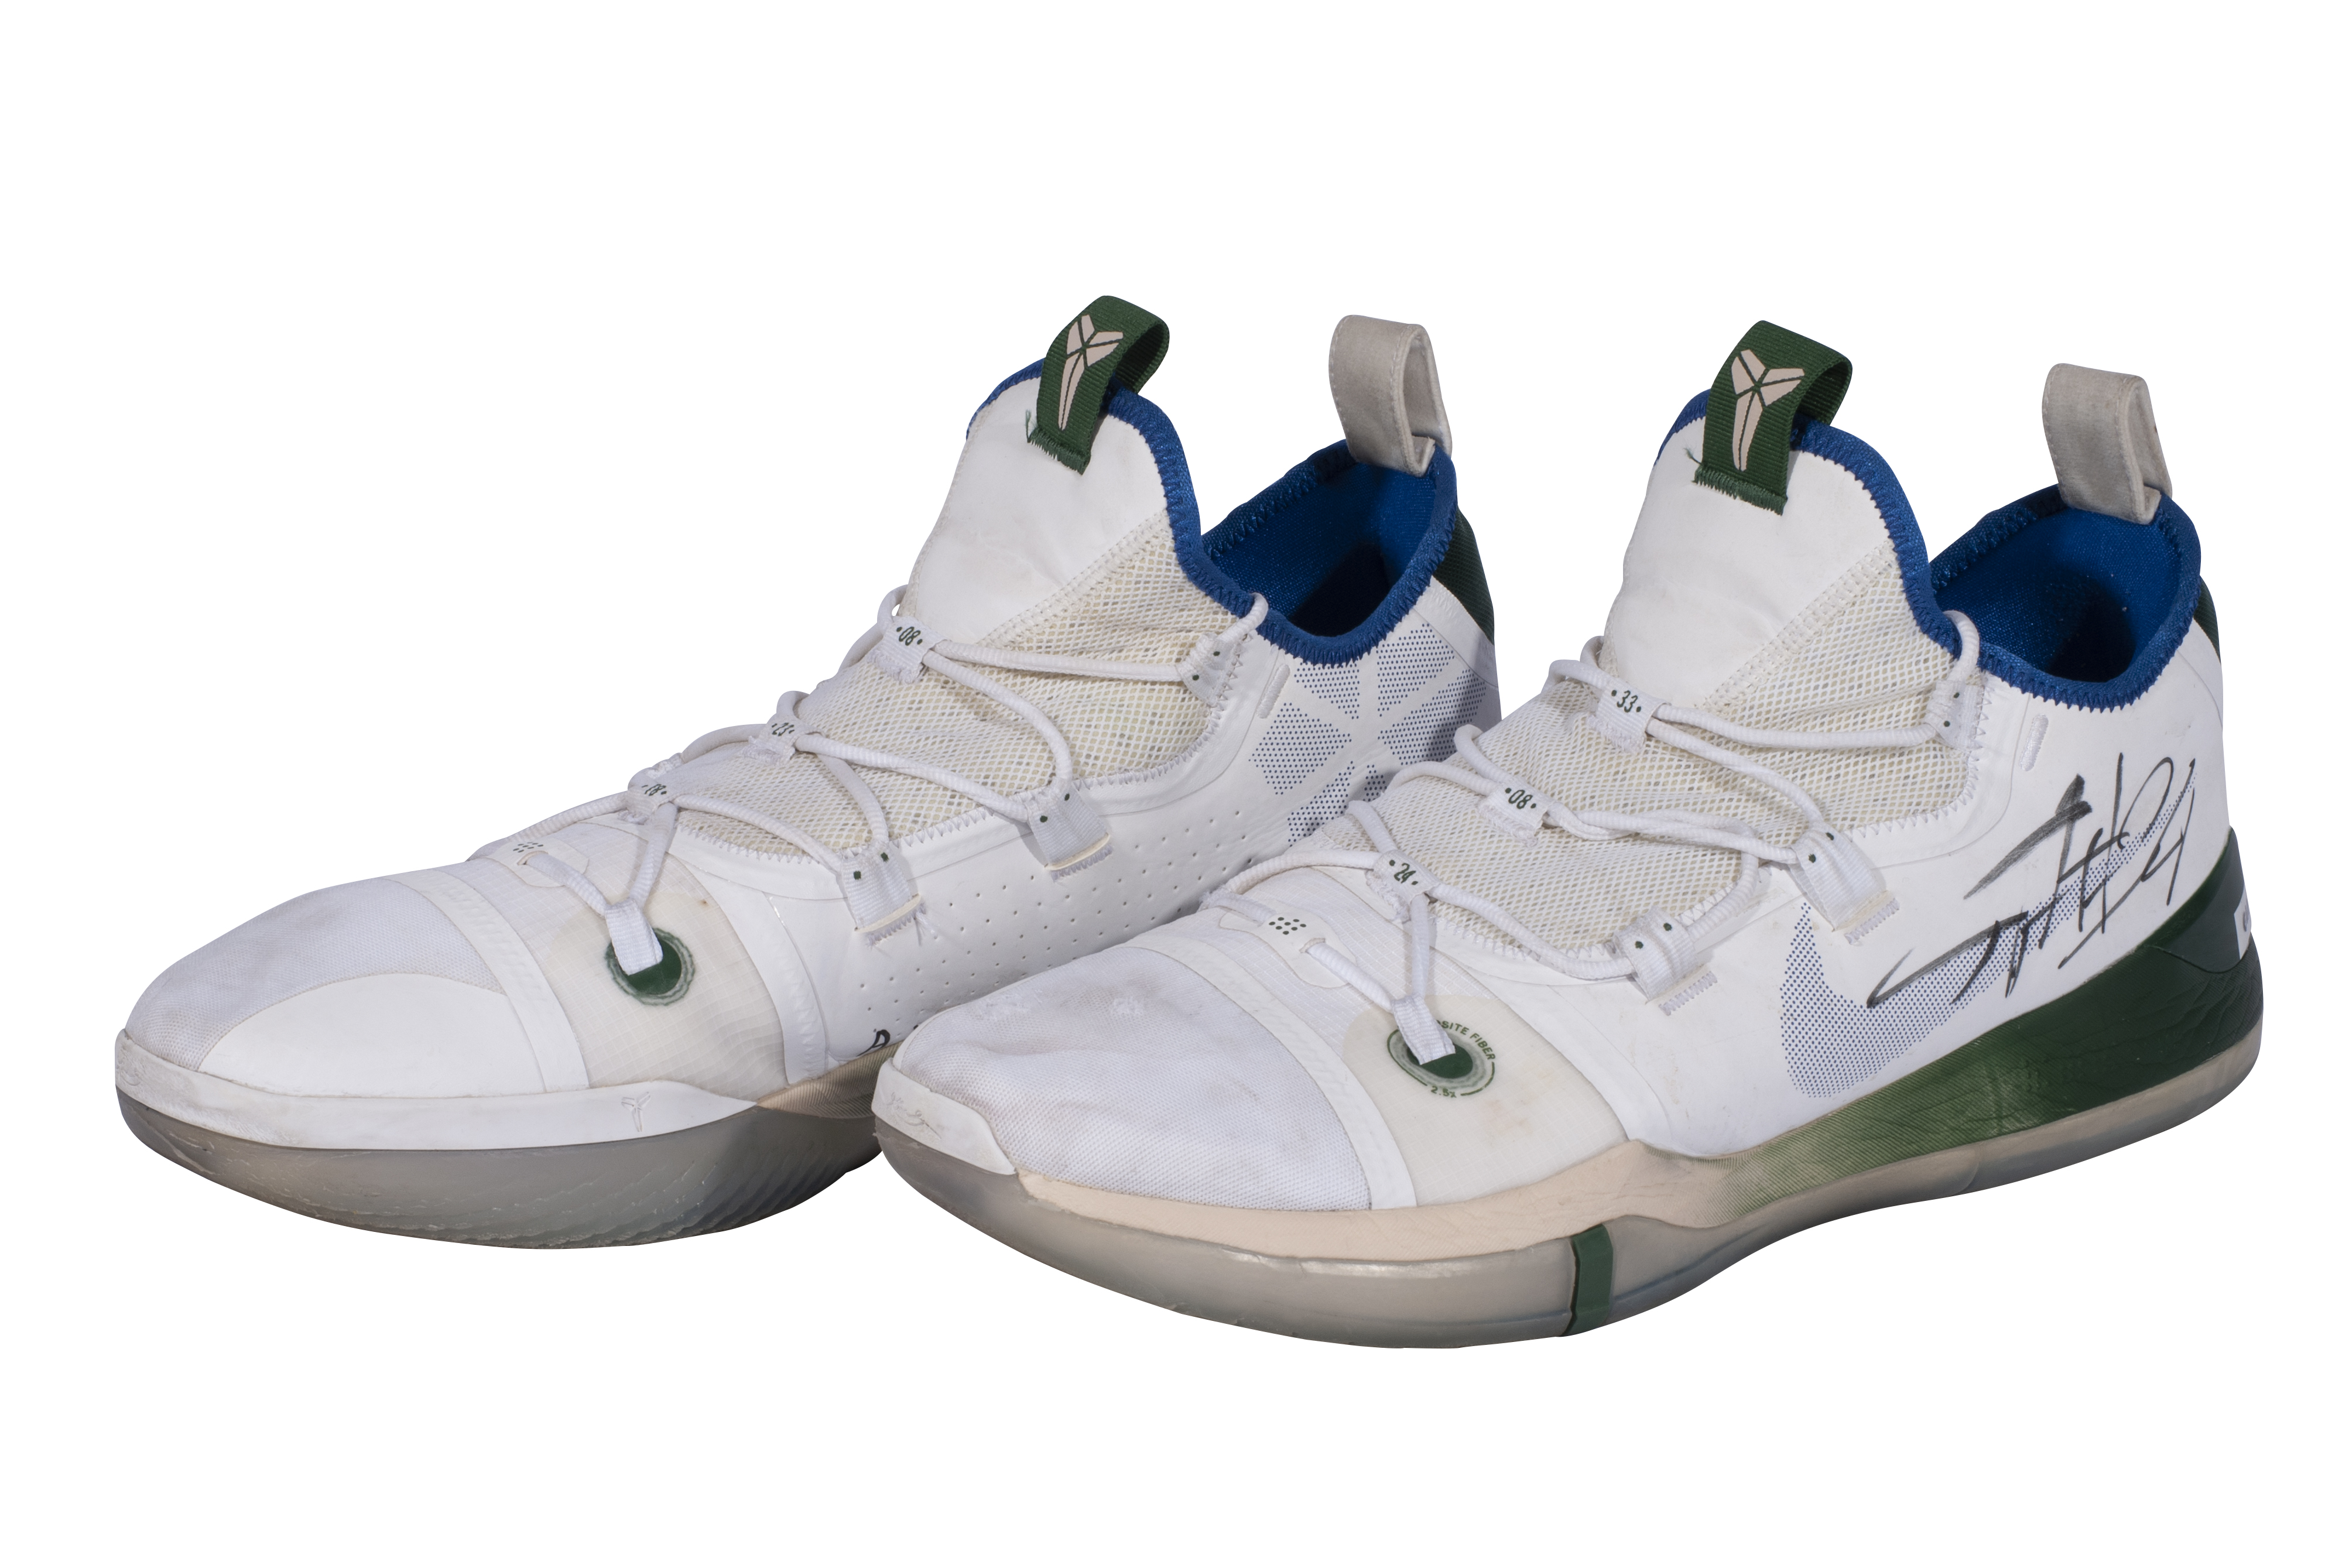 Why first Antetokounmpo signature shoe has features similar to Kobes